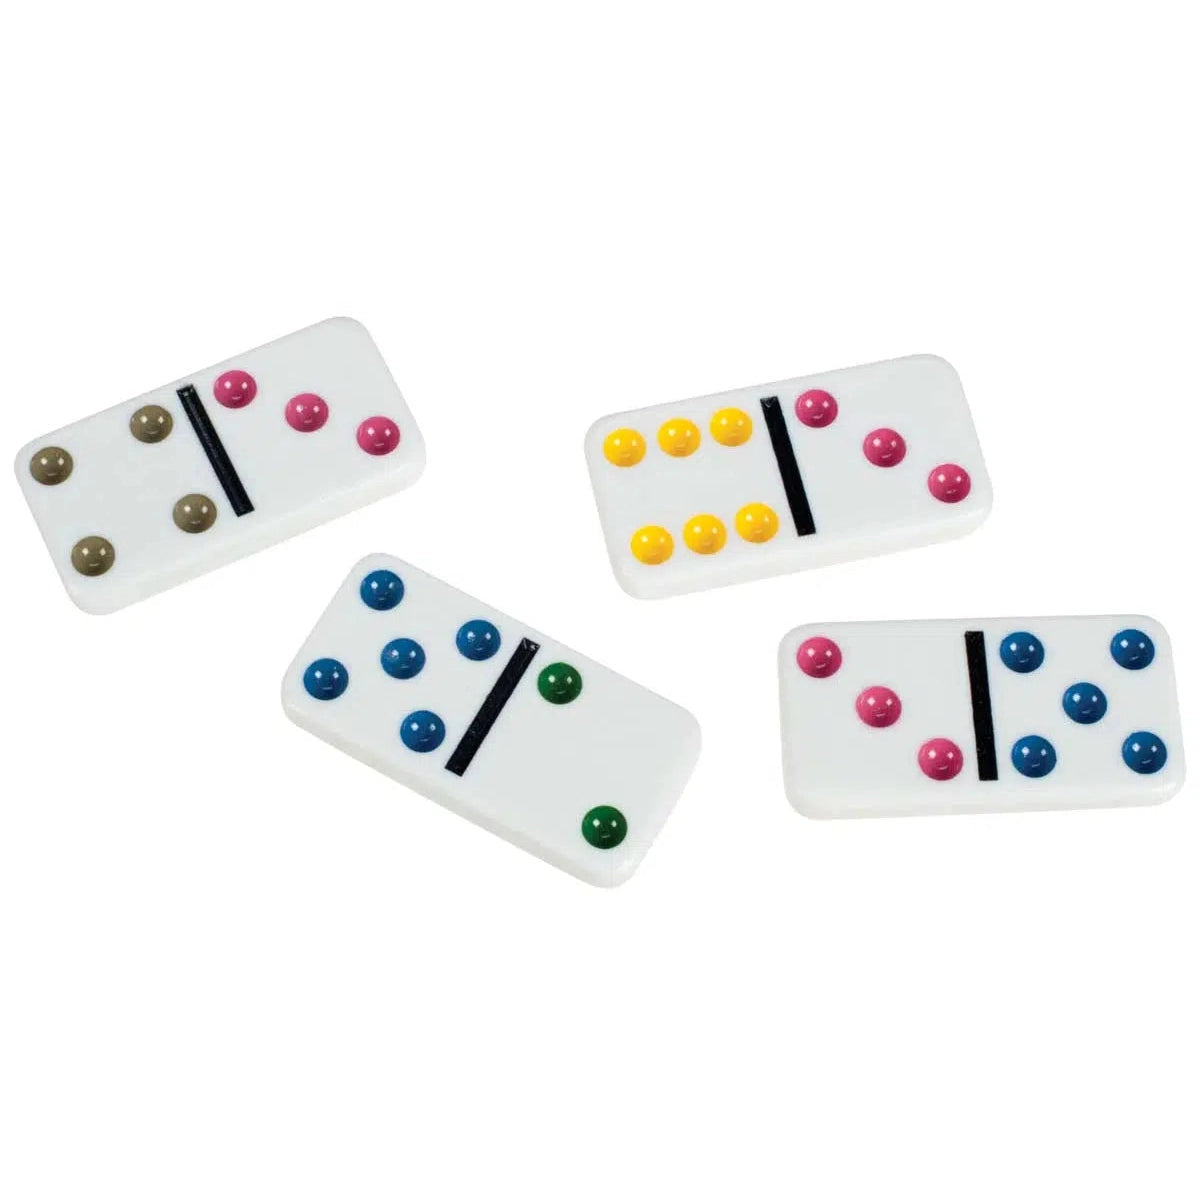 Front view of a view of the Double 6 Dominoes out of their tin showing the colors of the dots.